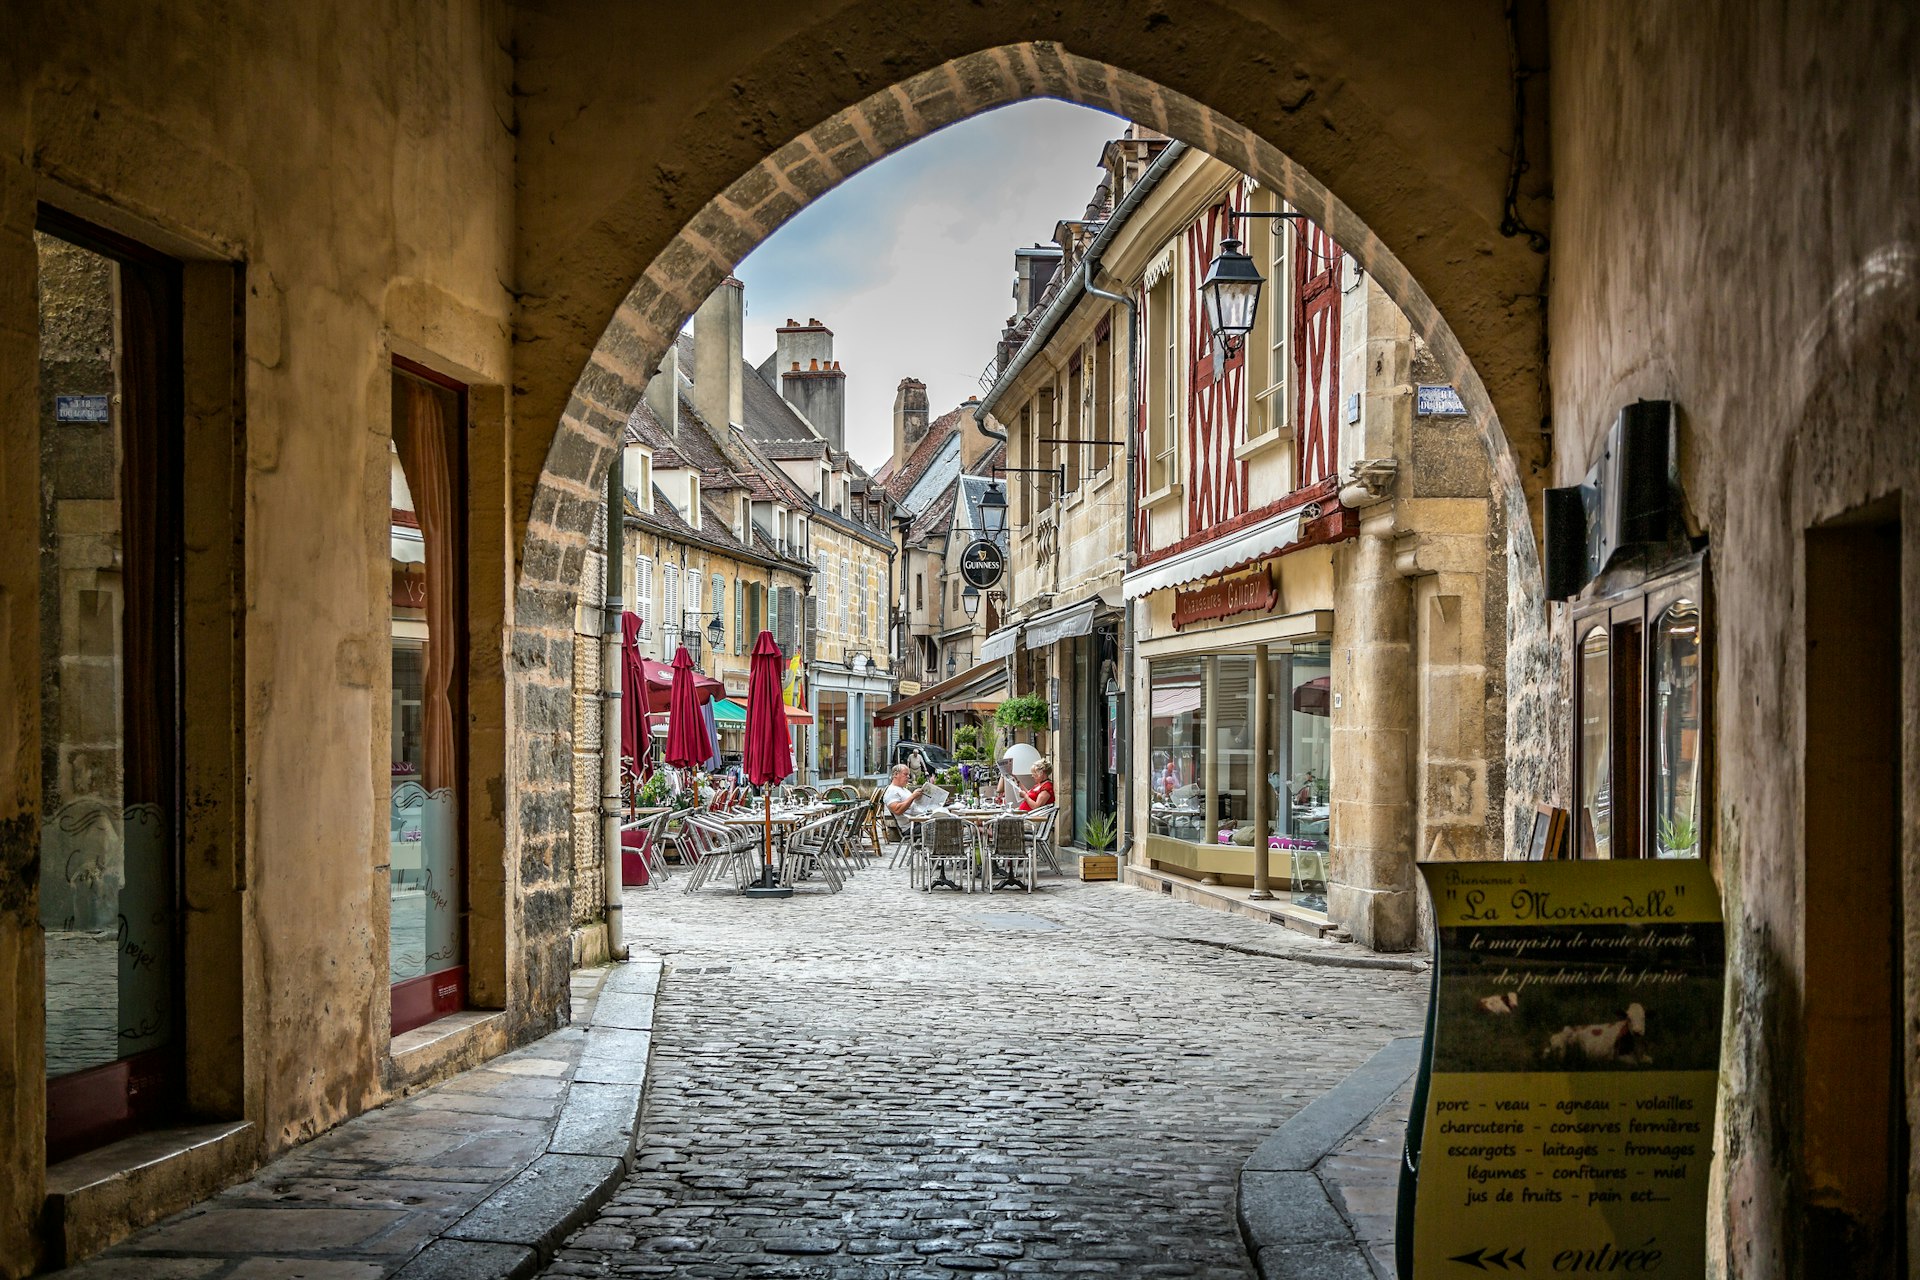 A view of the old town in Semur-en-Auxois through an archway and along cobbled streets